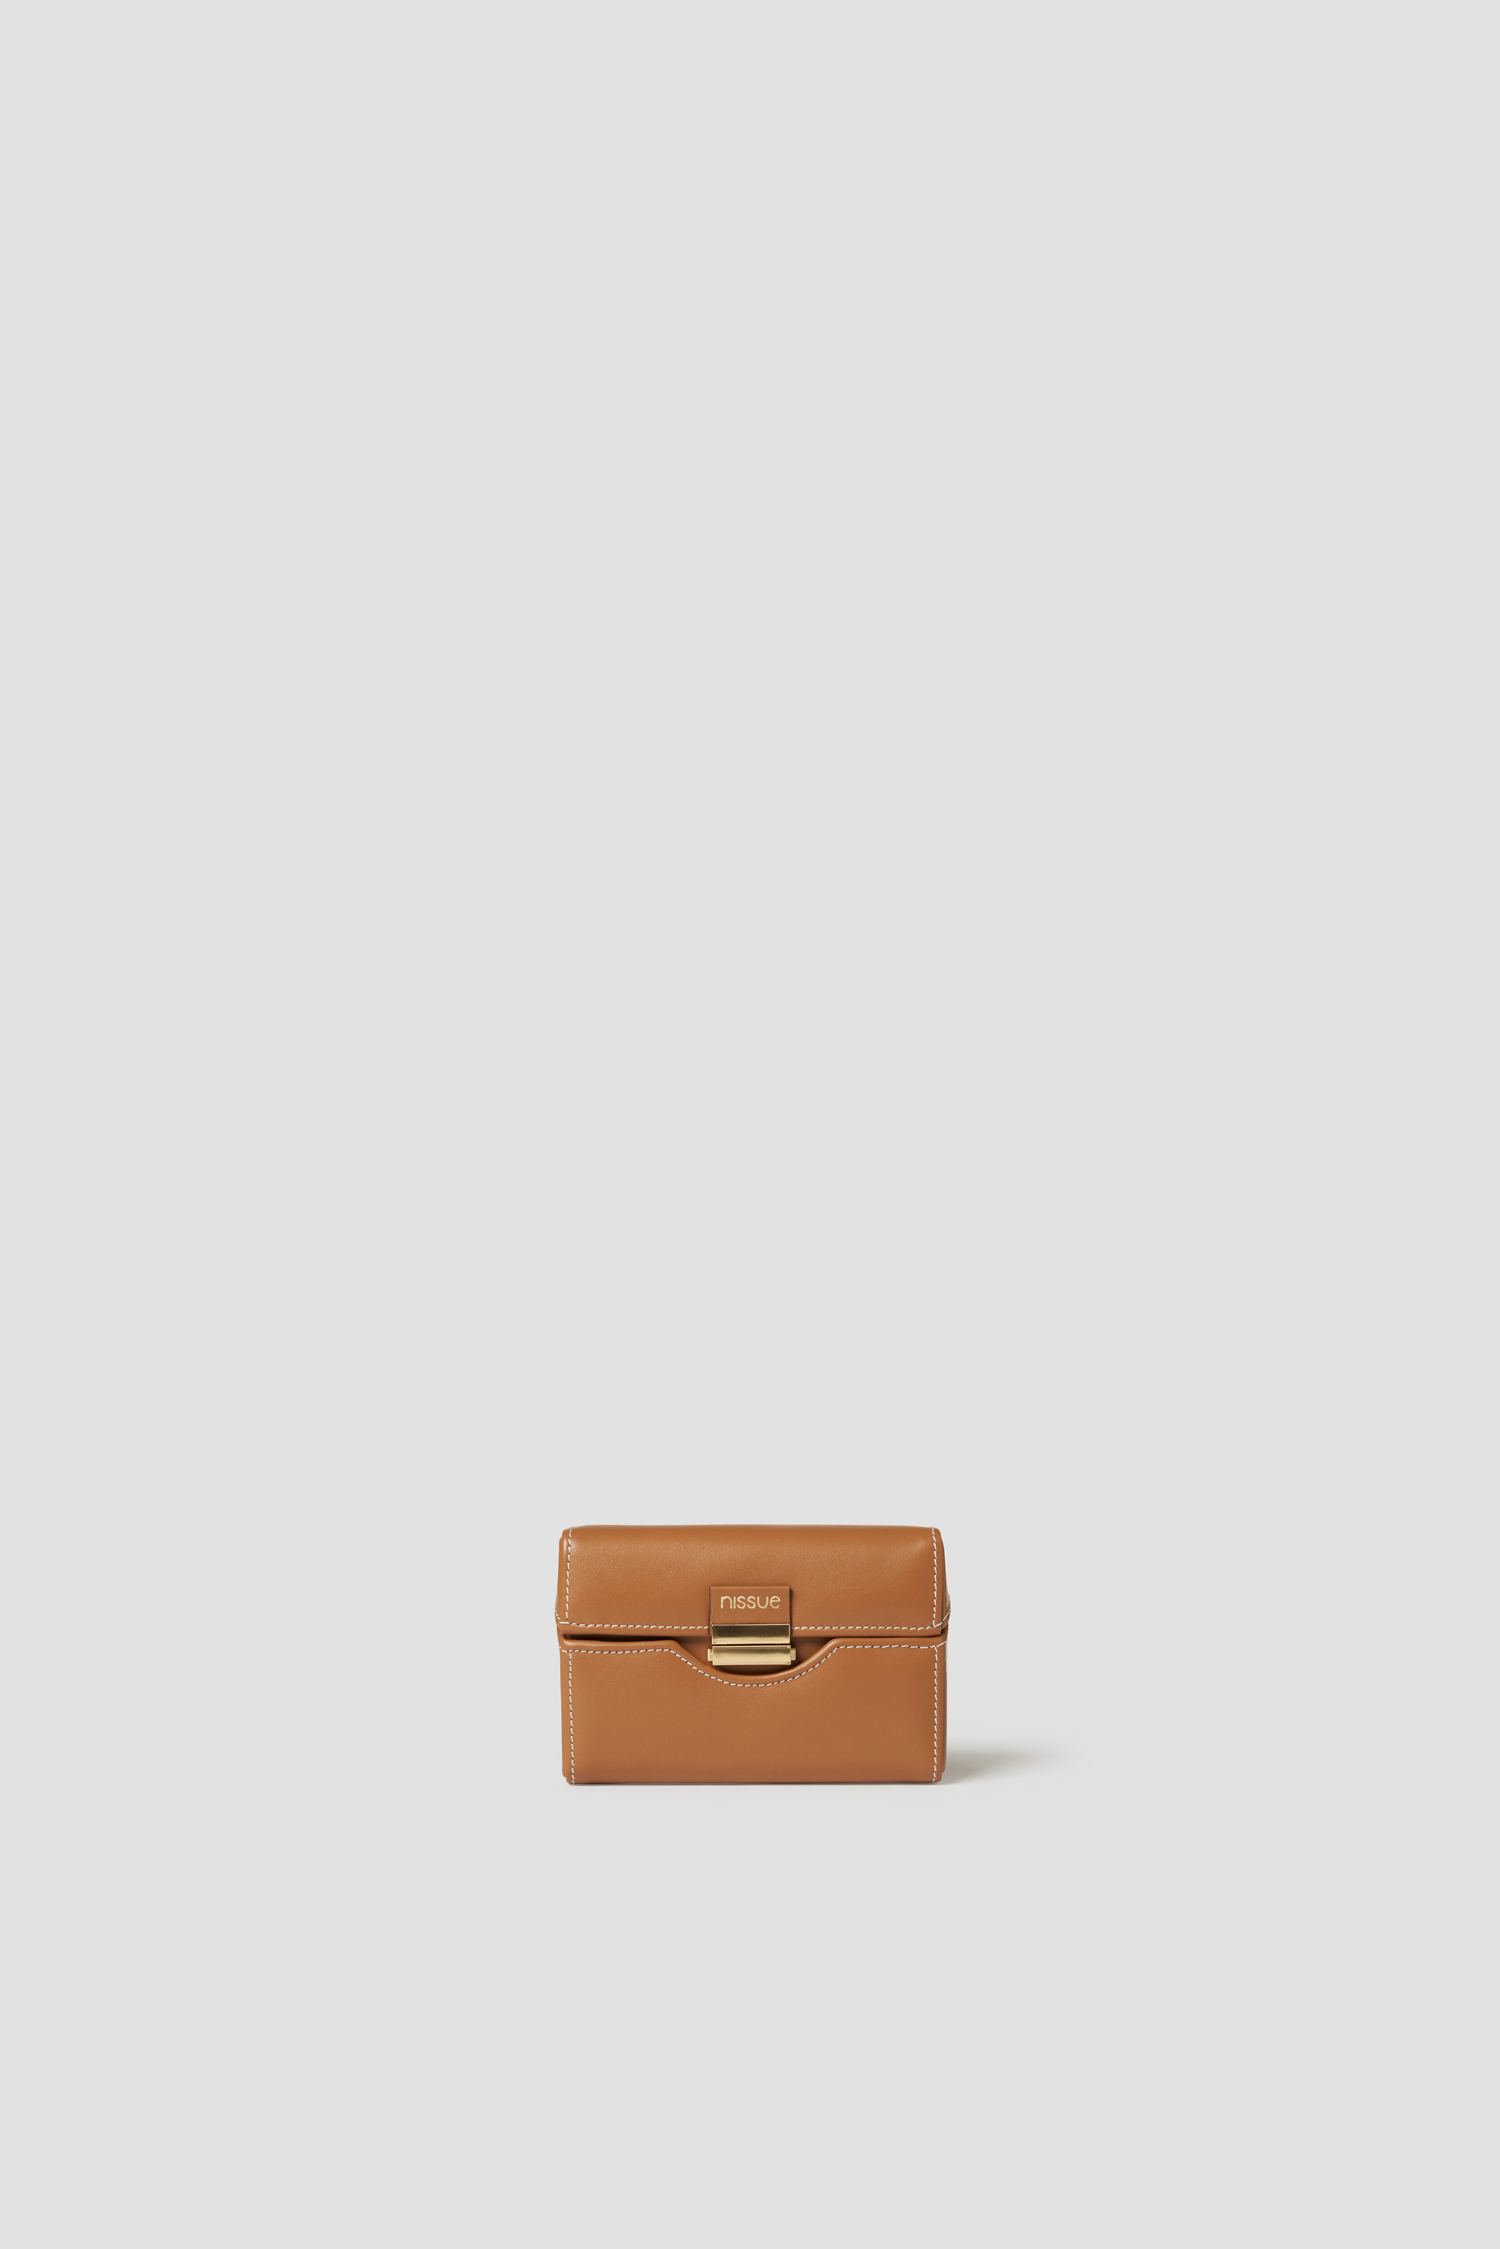 Nissue Official Store | 2023 | Luxury Leather Goods – NISSUE